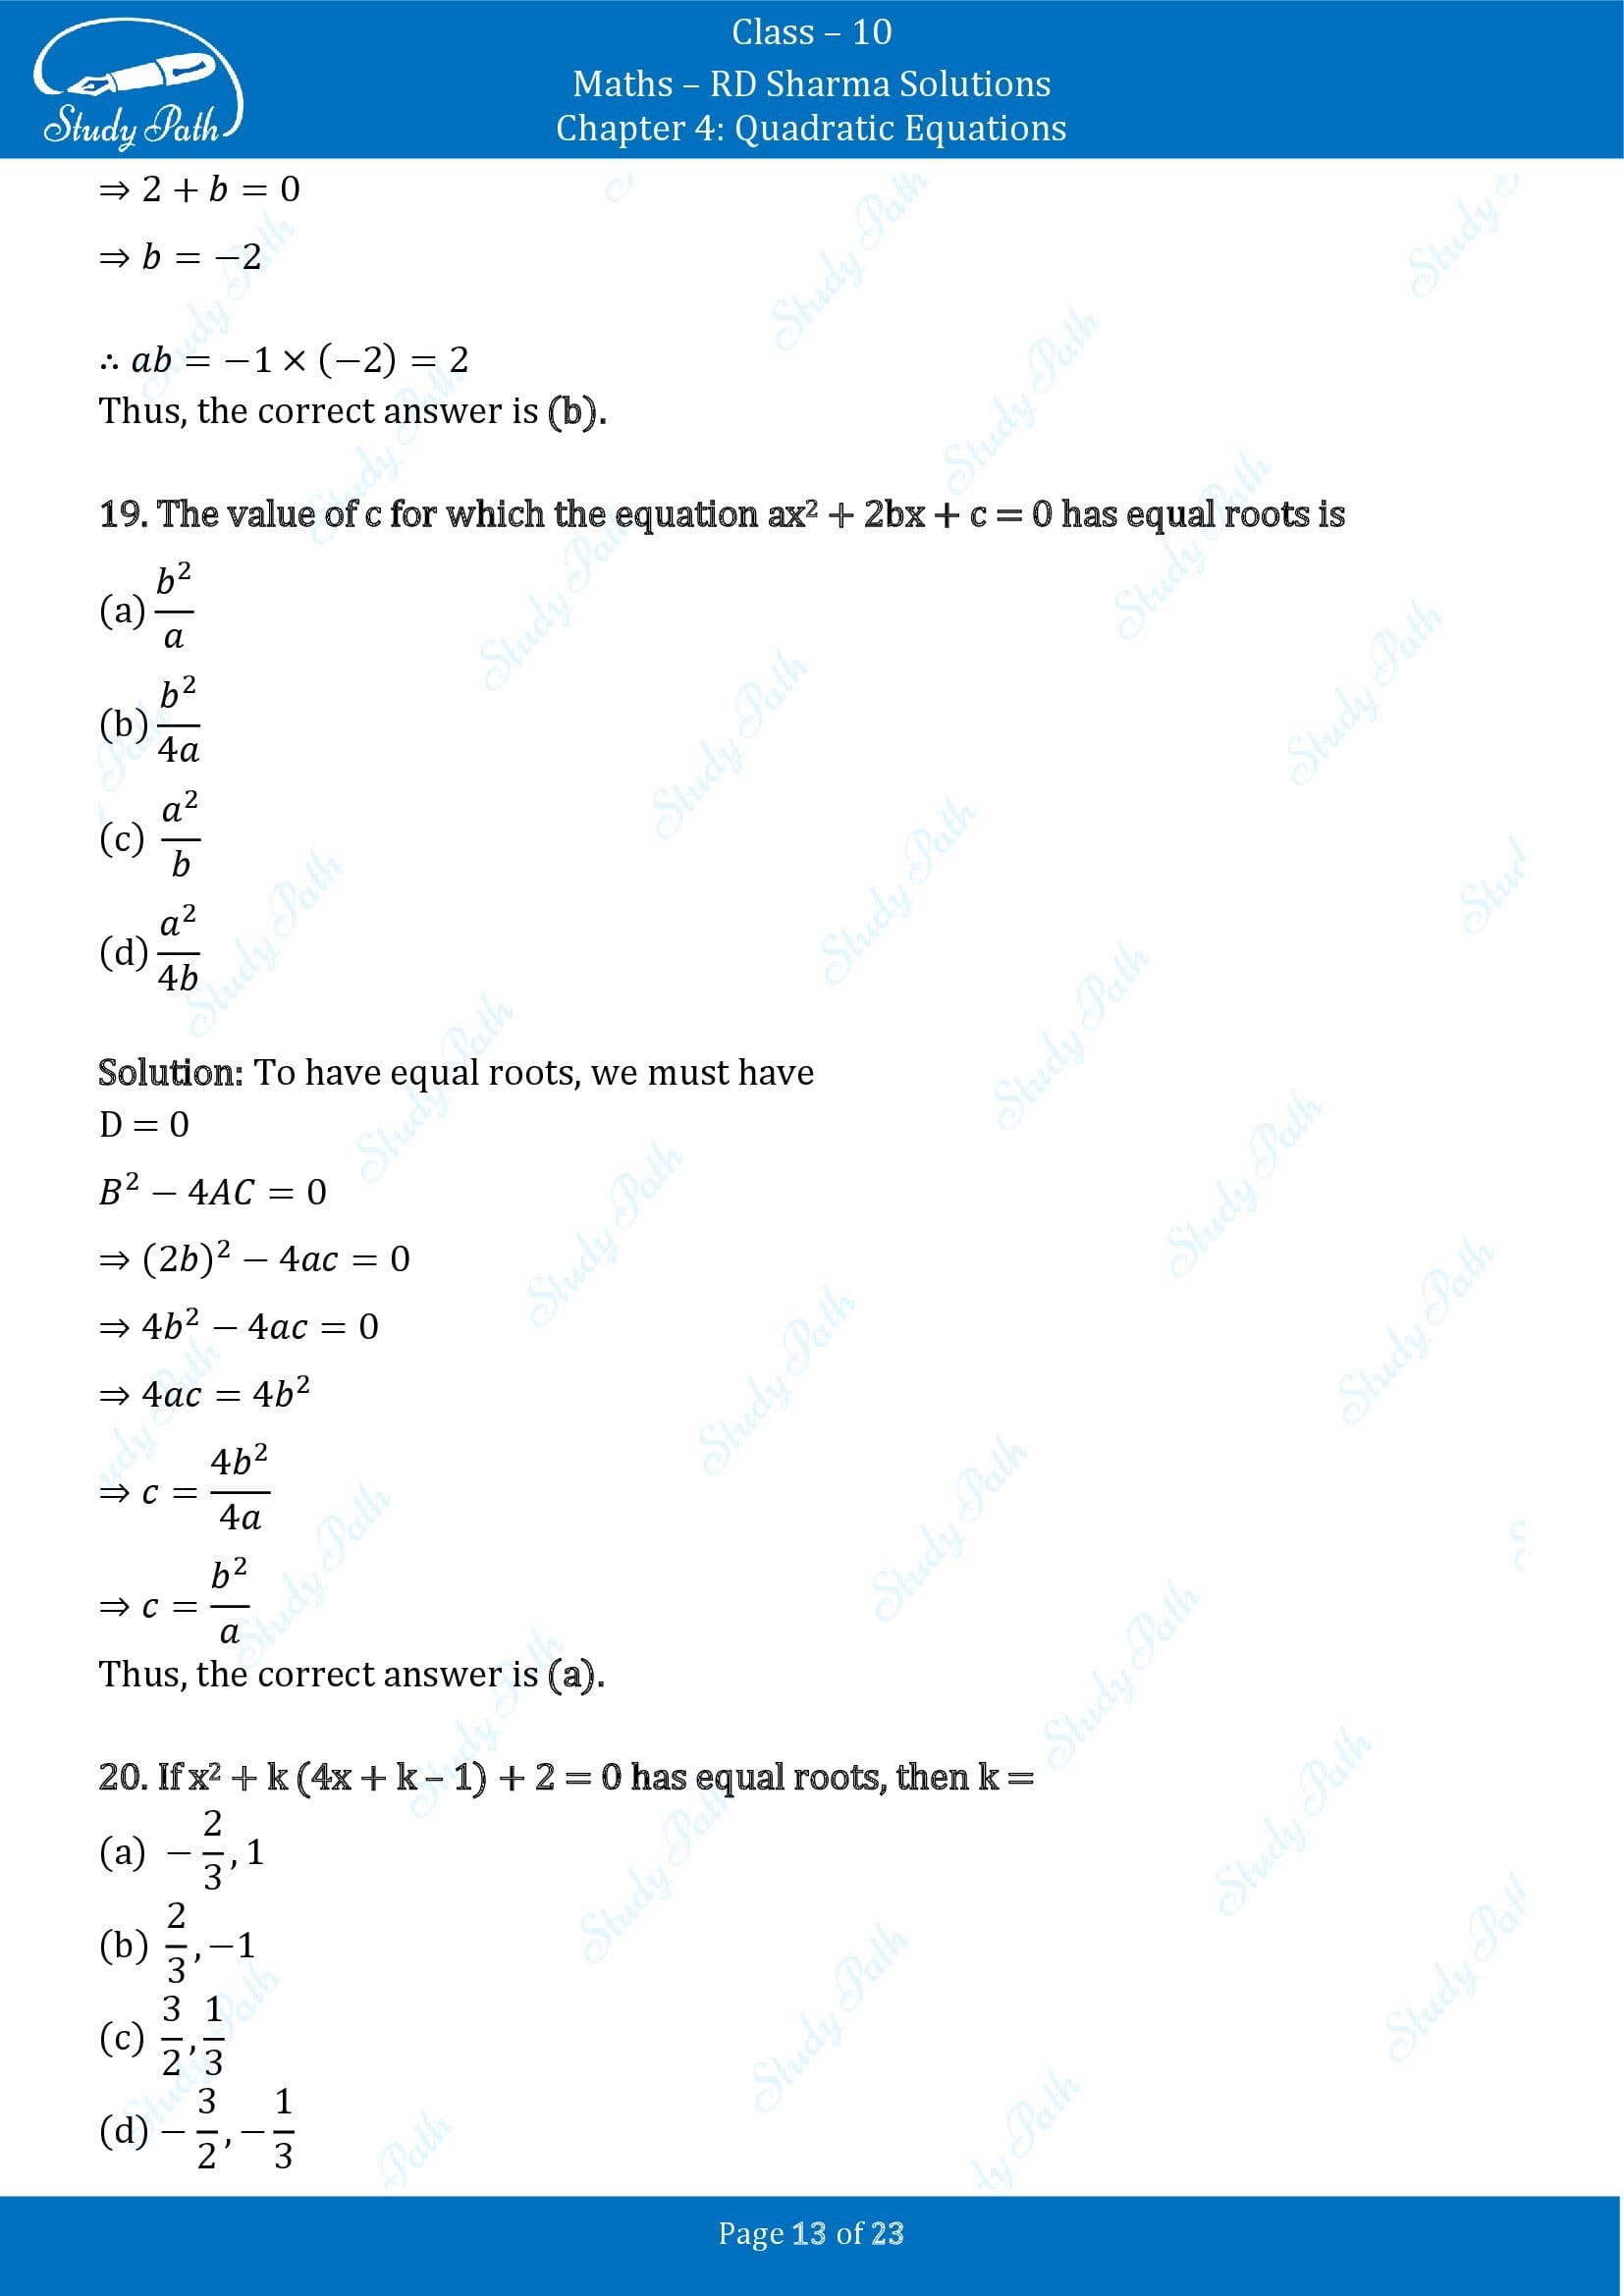 RD Sharma Solutions Class 10 Chapter 4 Quadratic Equations Multiple Choice Questions MCQs 00013